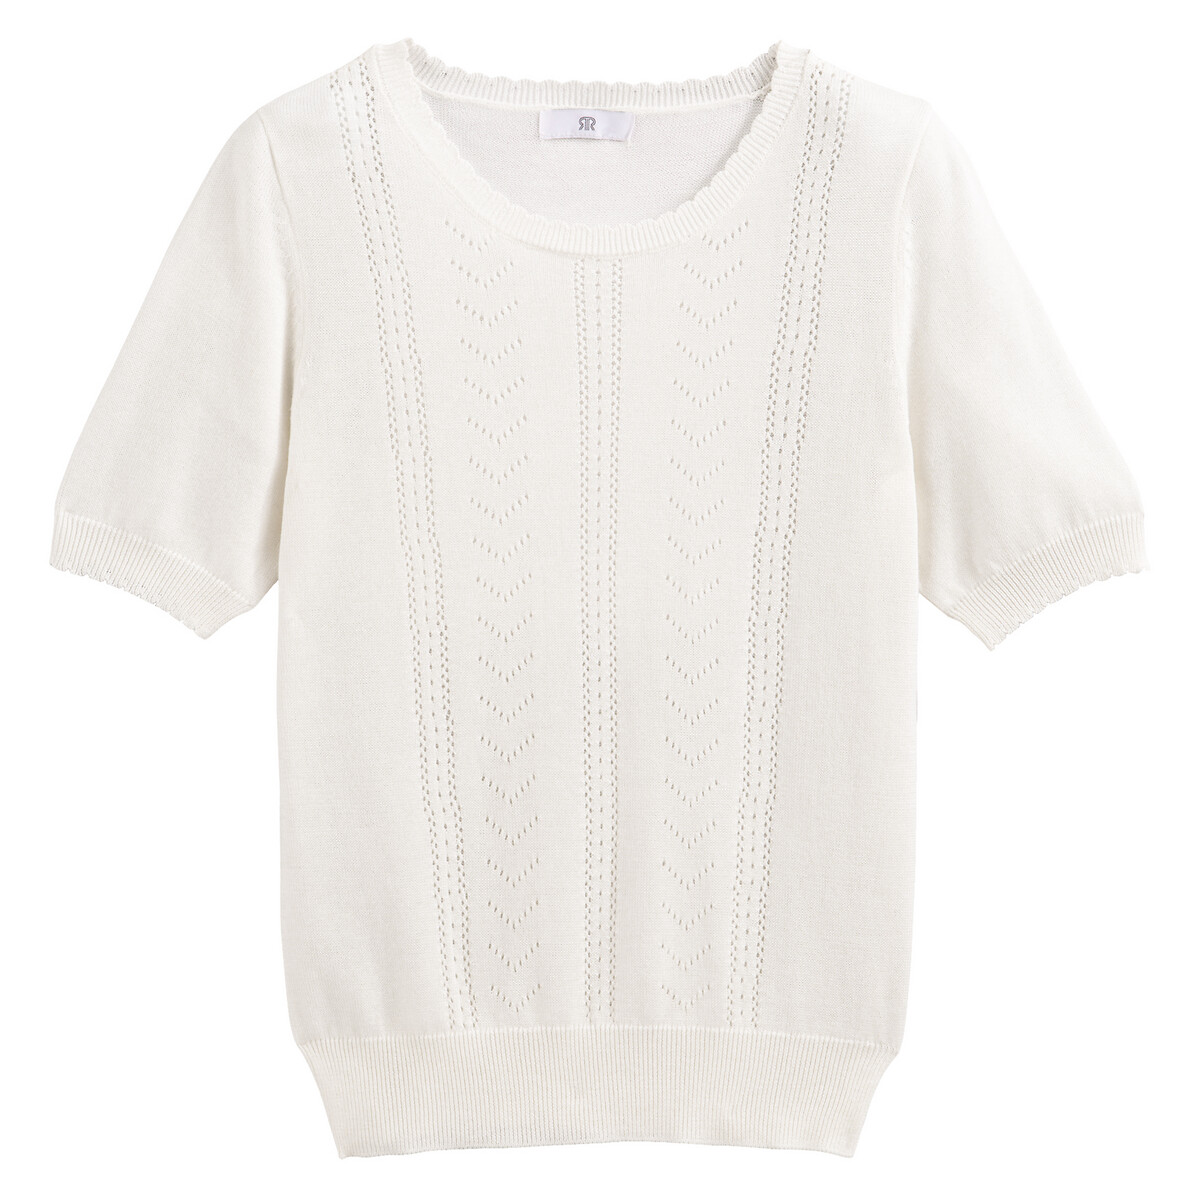 Recycled Cotton Mix Jumper in Fine Pointelle Knit with Short Sleeves